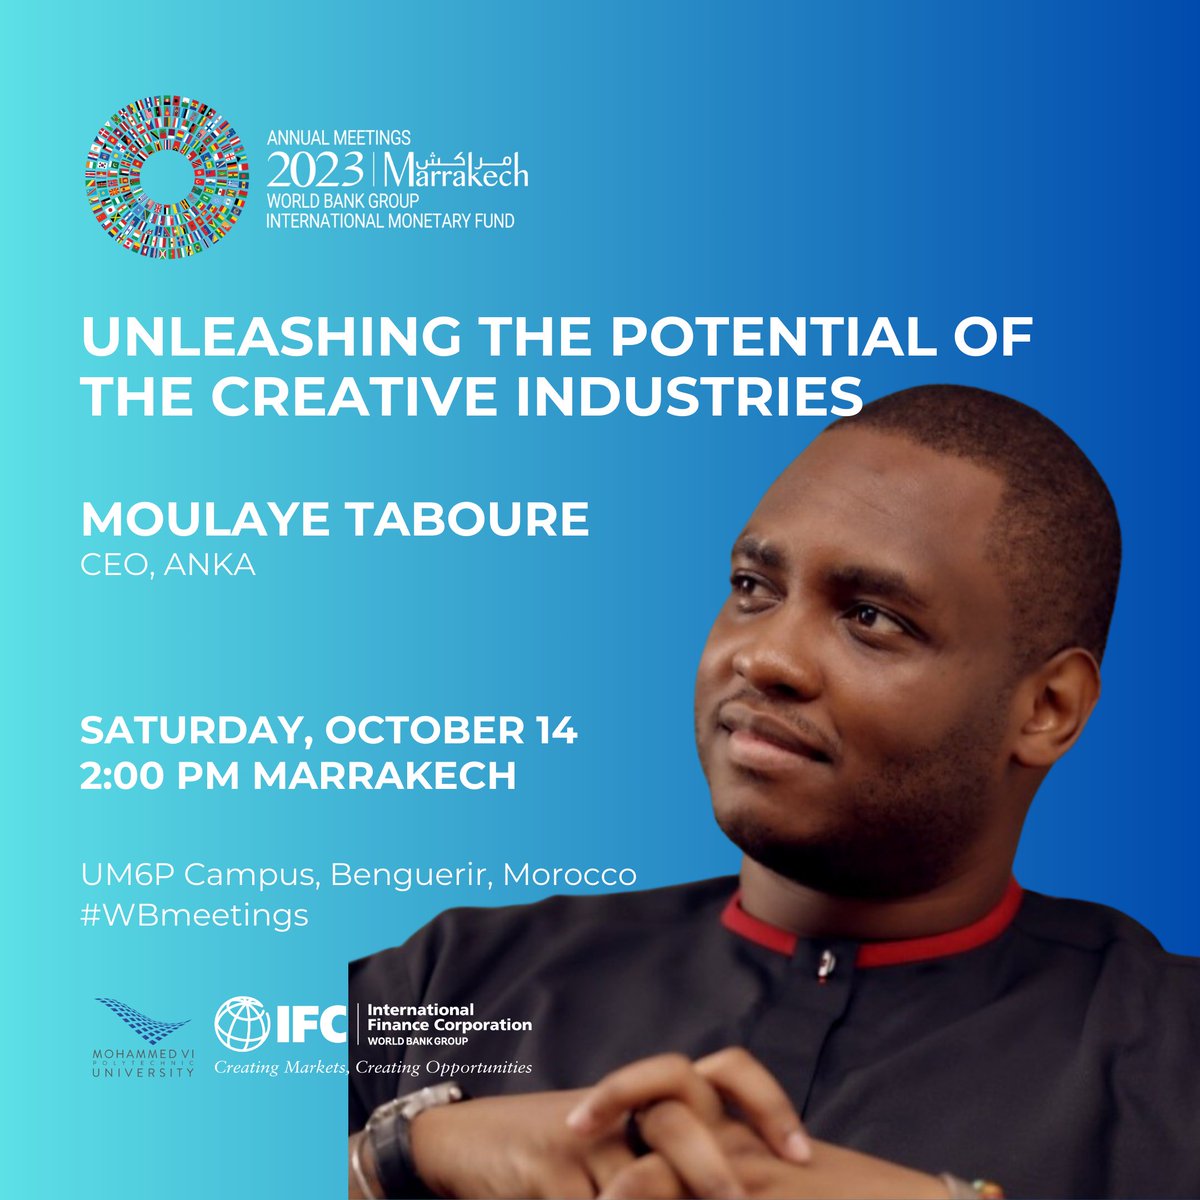 African creative sector is expanding with innovation and opportunities, igniting economic growth and new paths, especially for young people. Join IFC & @UM6P_officiel on Saturday, October 14, for this event on #CreativeIndustries to learn more: wrld.bg/j6zW50PSupa #WBMeetings